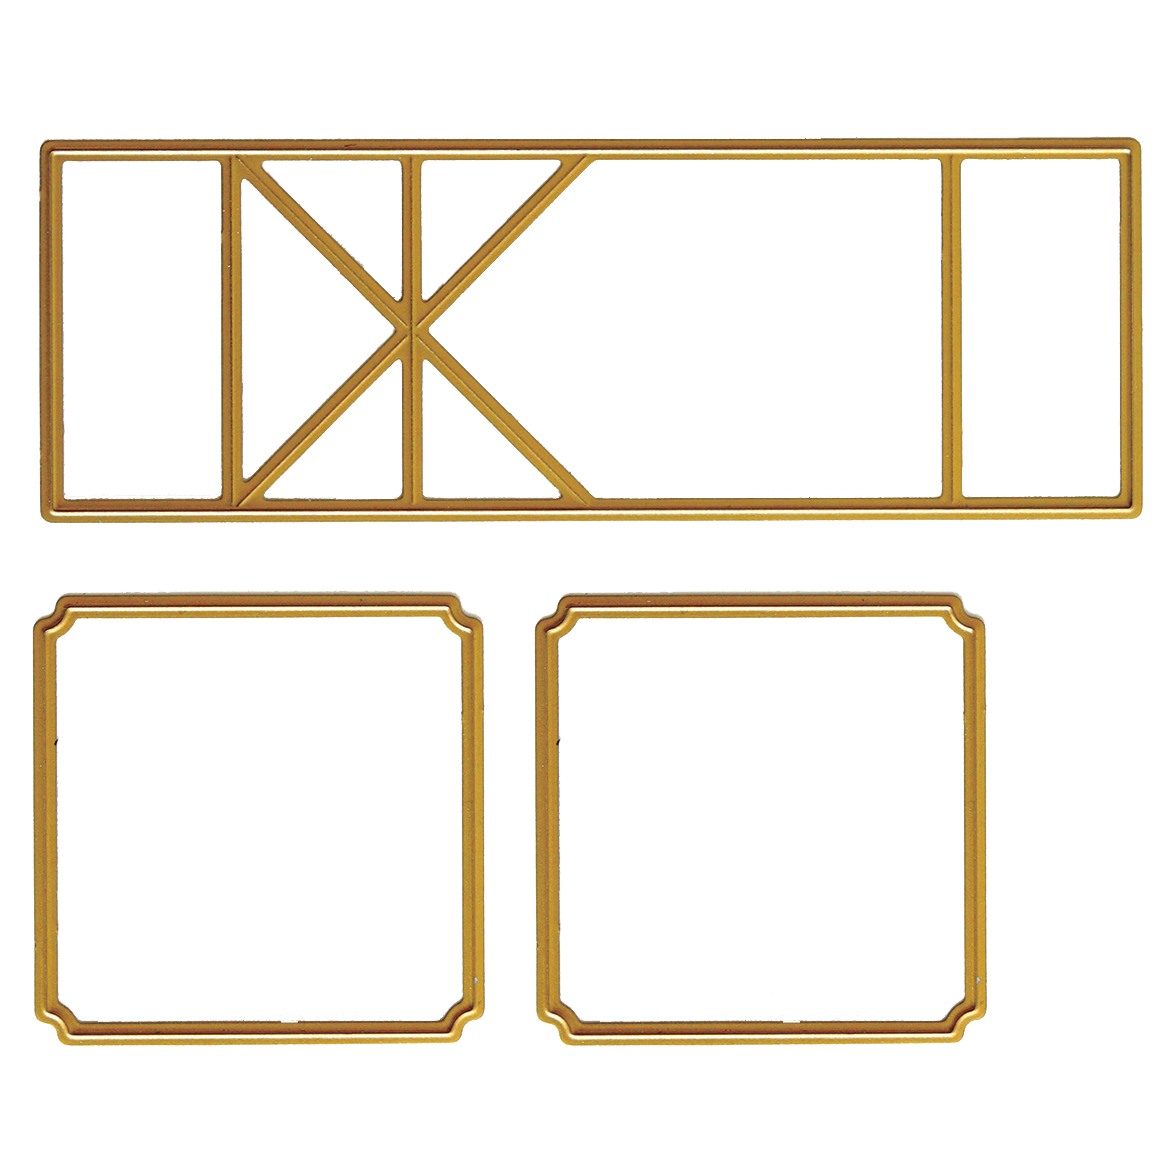 Three gold-colored rectangular frames of varying shapes and sizes, featuring embellishments ideal for card making. Two are square with beveled corners, and one is longer with internal geometric divisions. This set is called Swing Out Dies.